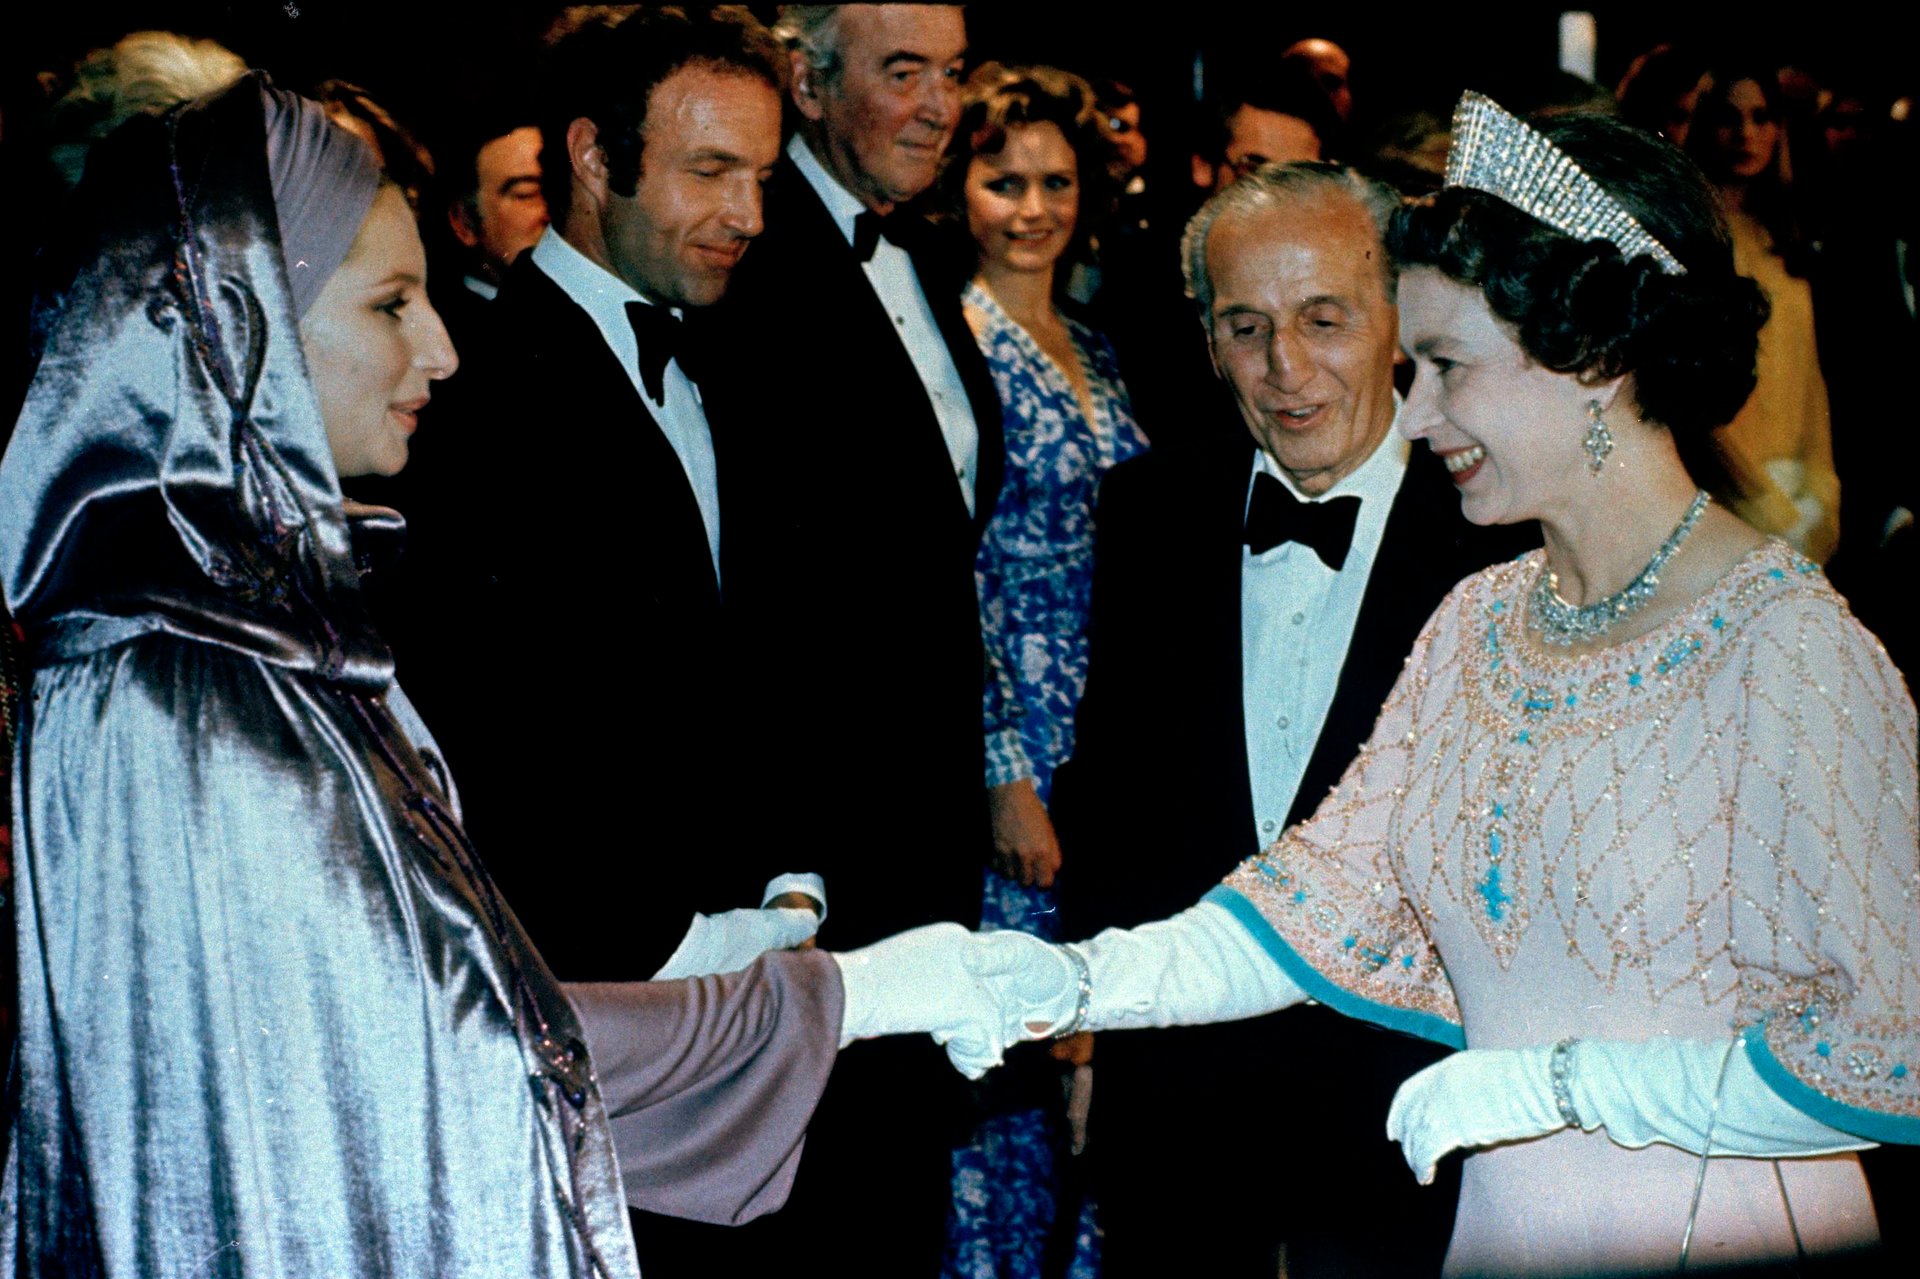 Meeting Queen Elizabeth II in a Ray Aghayan cape